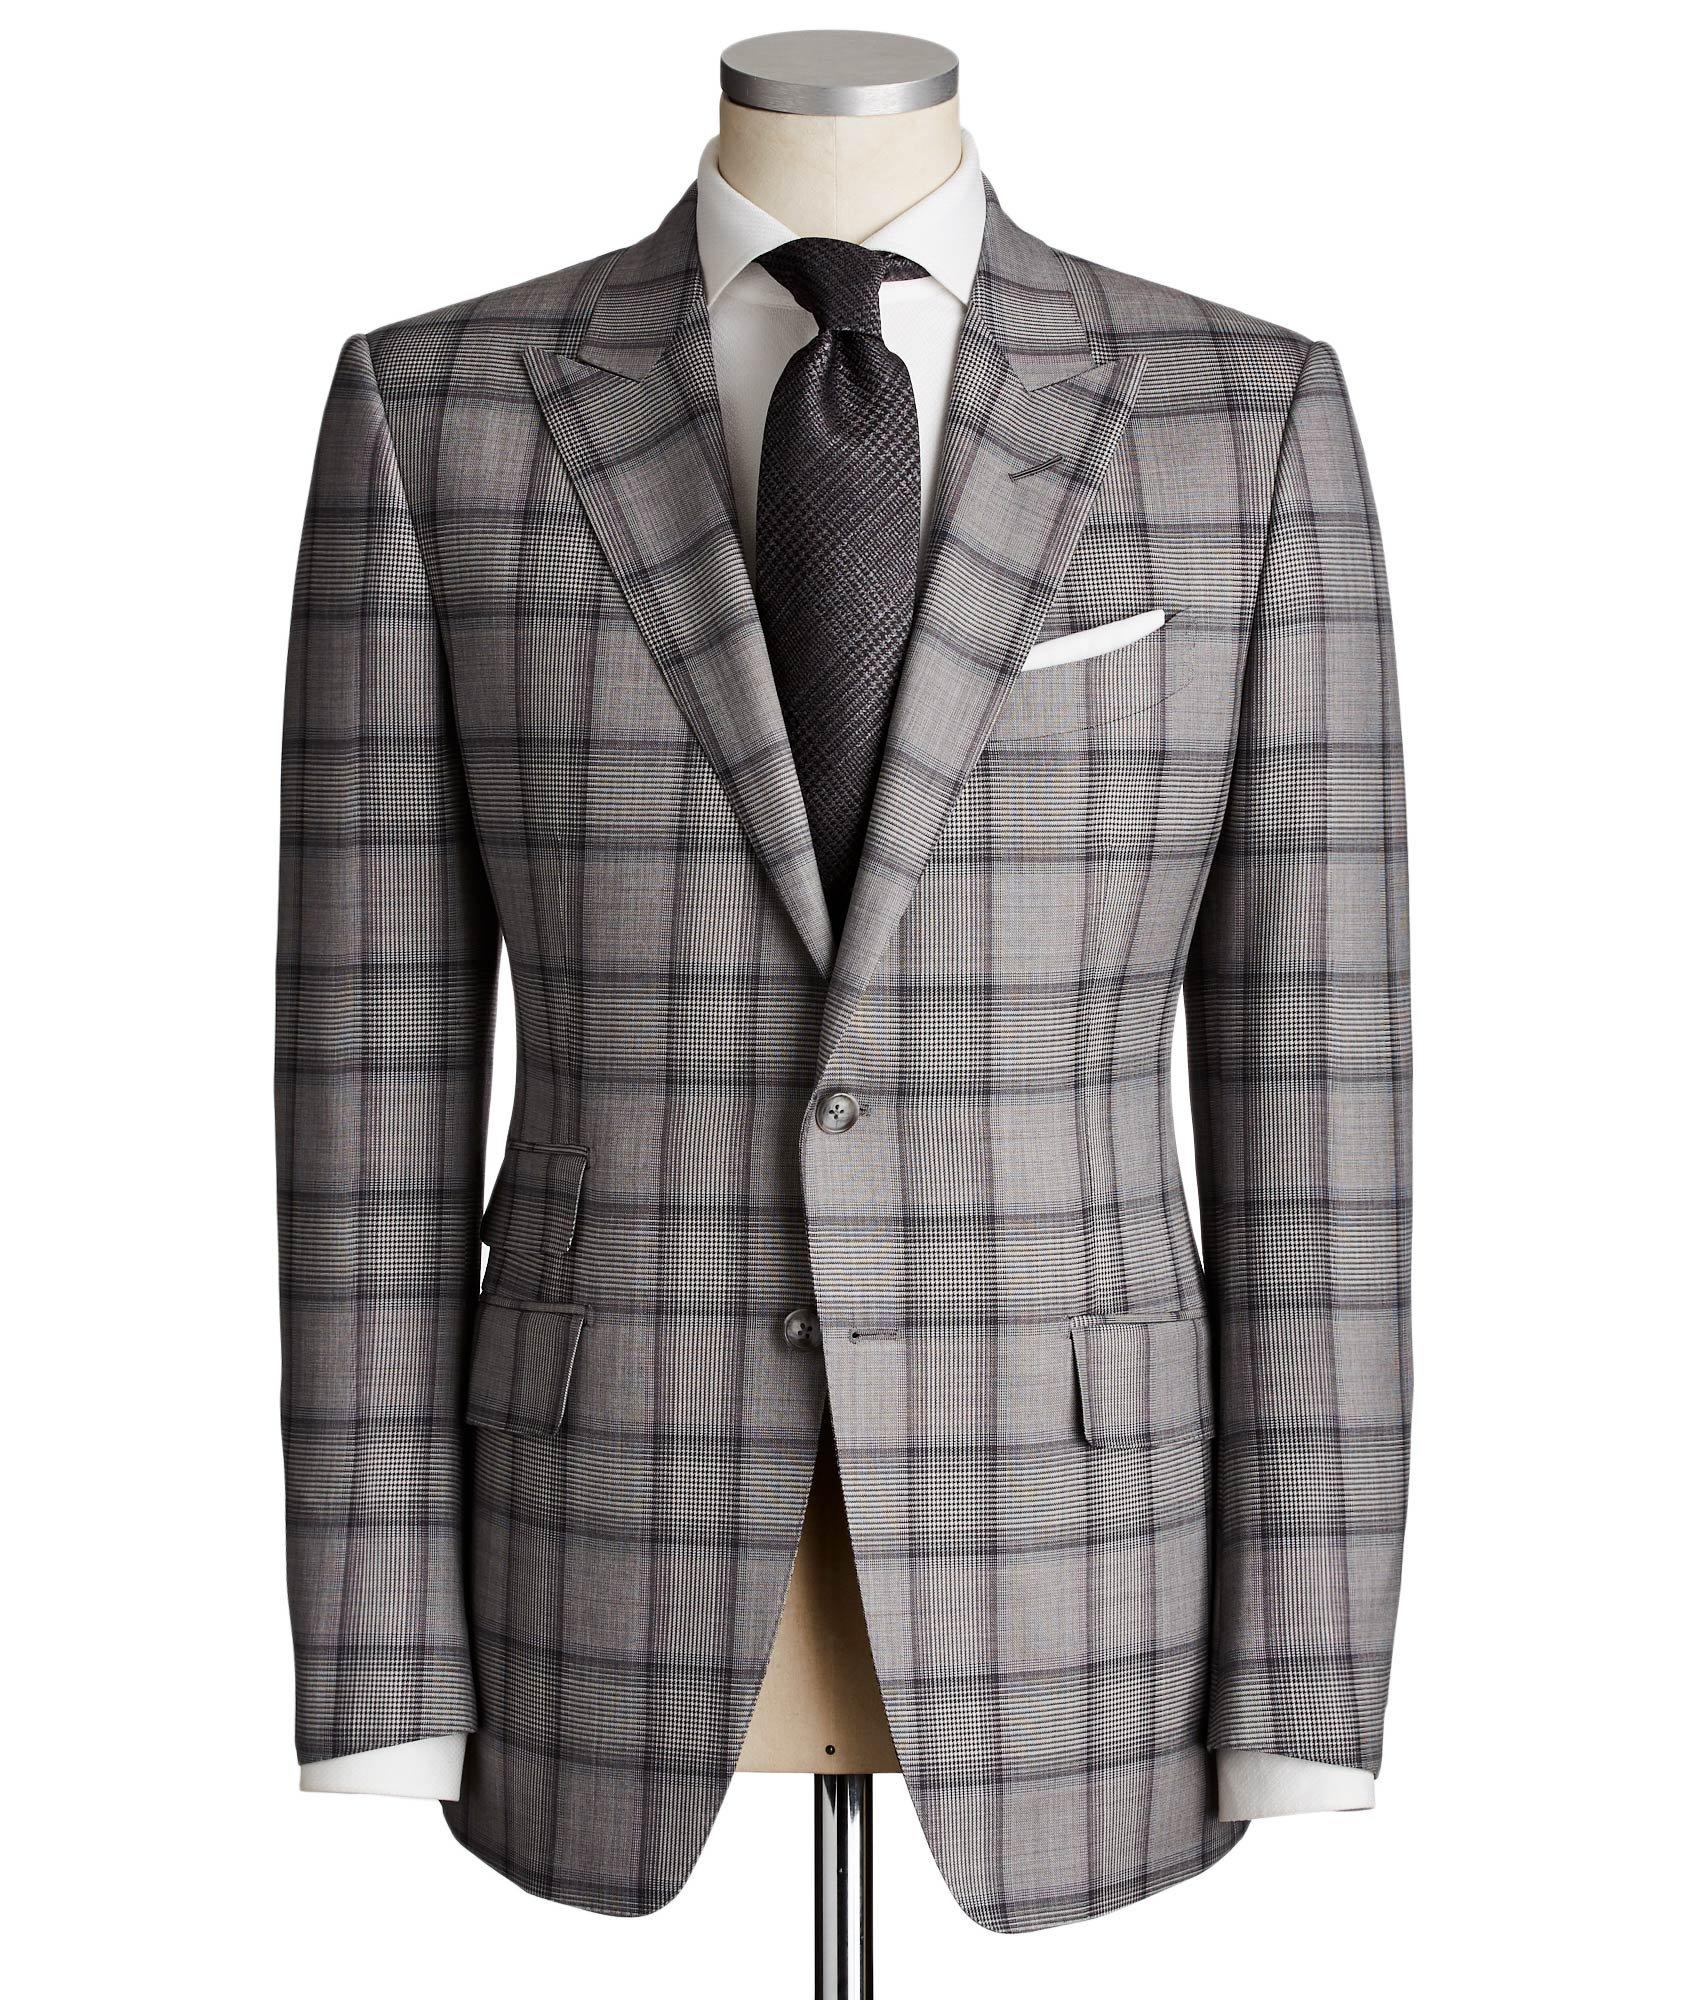 O'Connor Glen Check Suit image 0